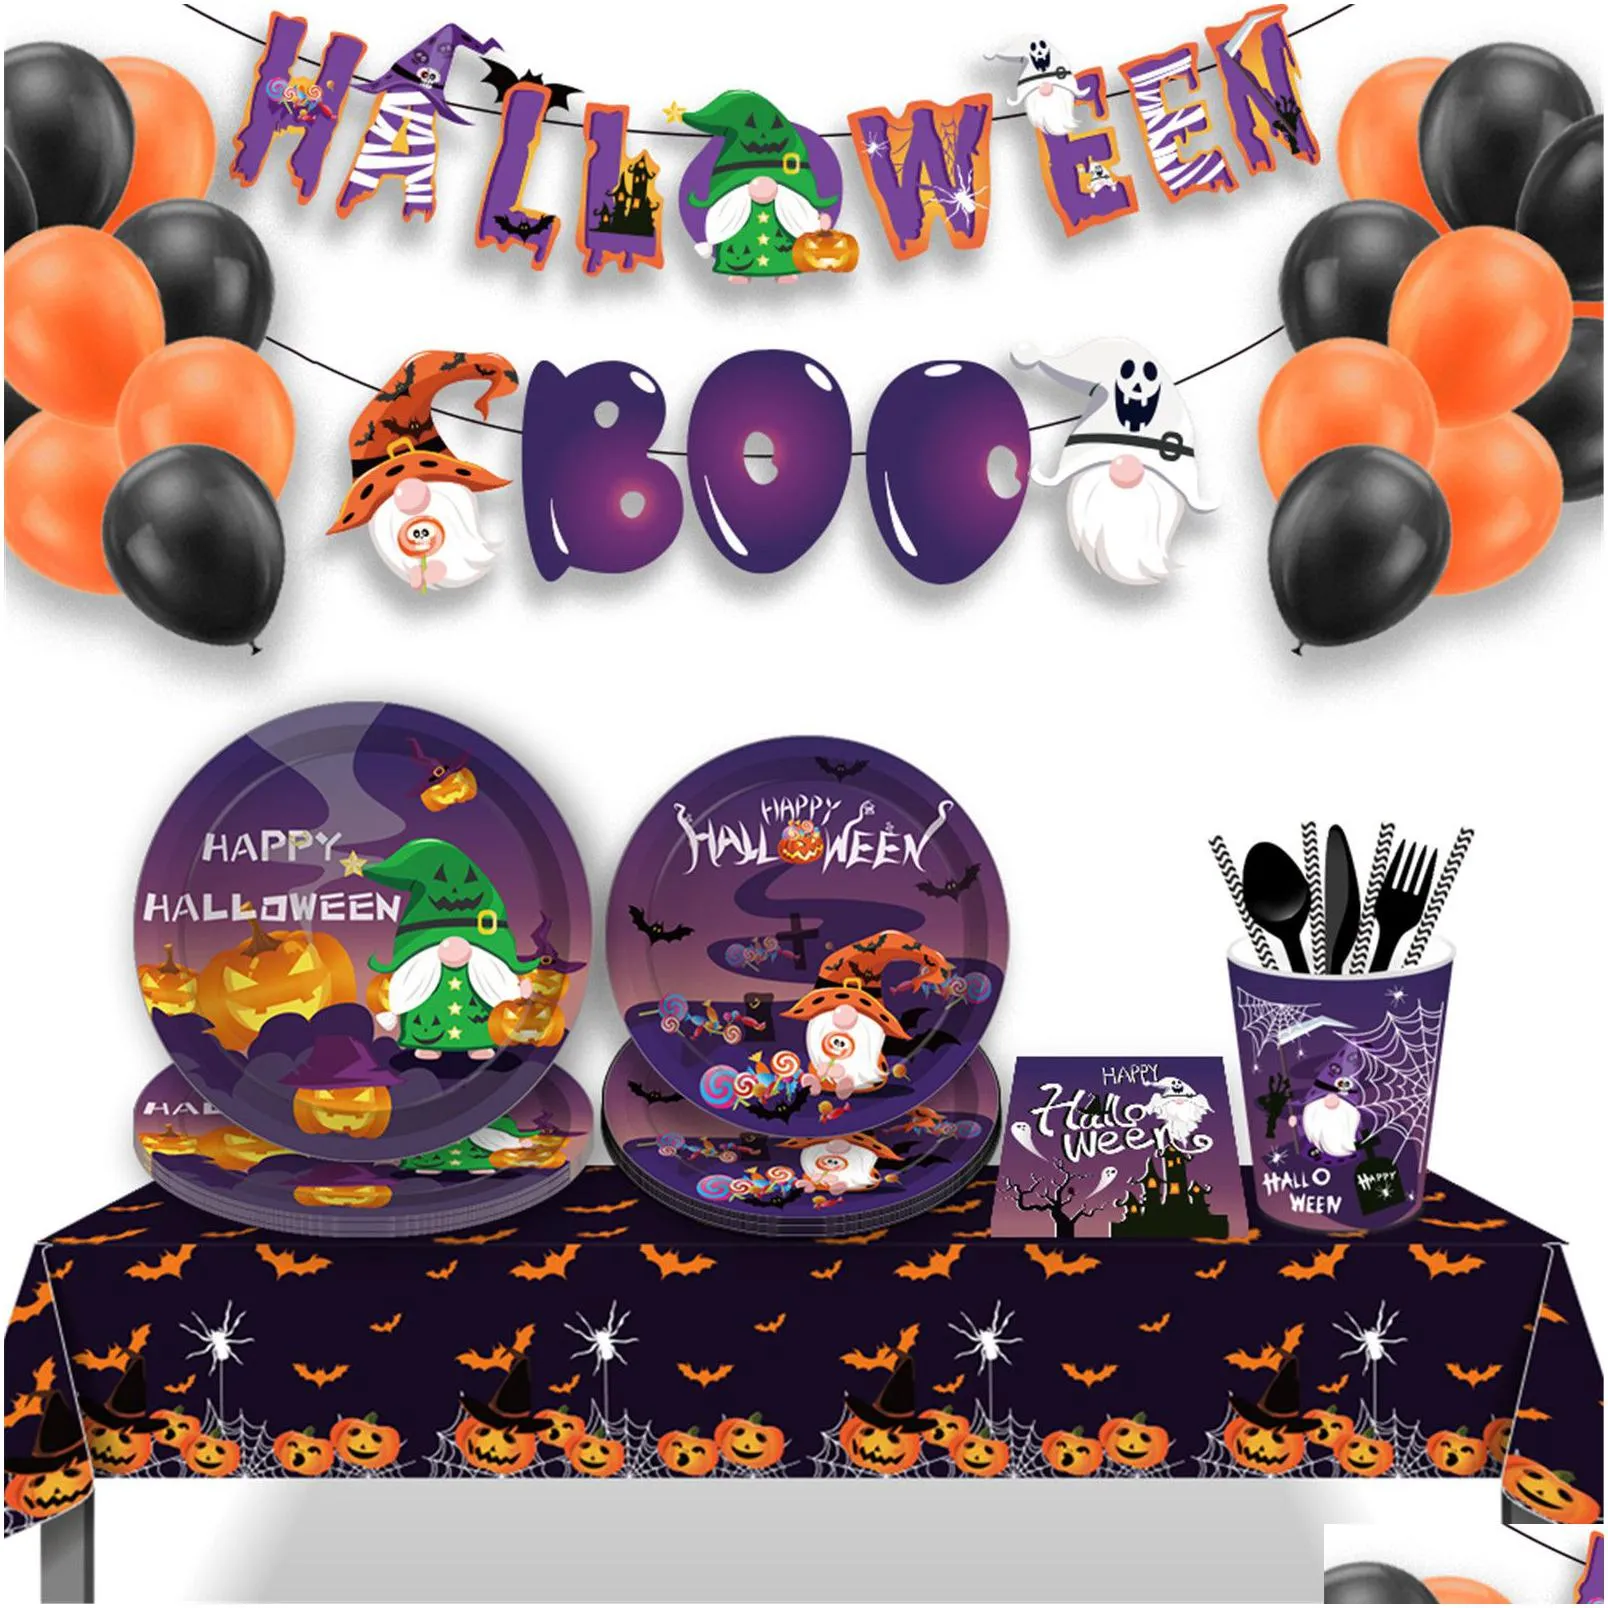 halloween dwarf faceless paper plates party plates and napkins birthday party supplie set party dinnerware serves 8 guests for plates, napkins, cups